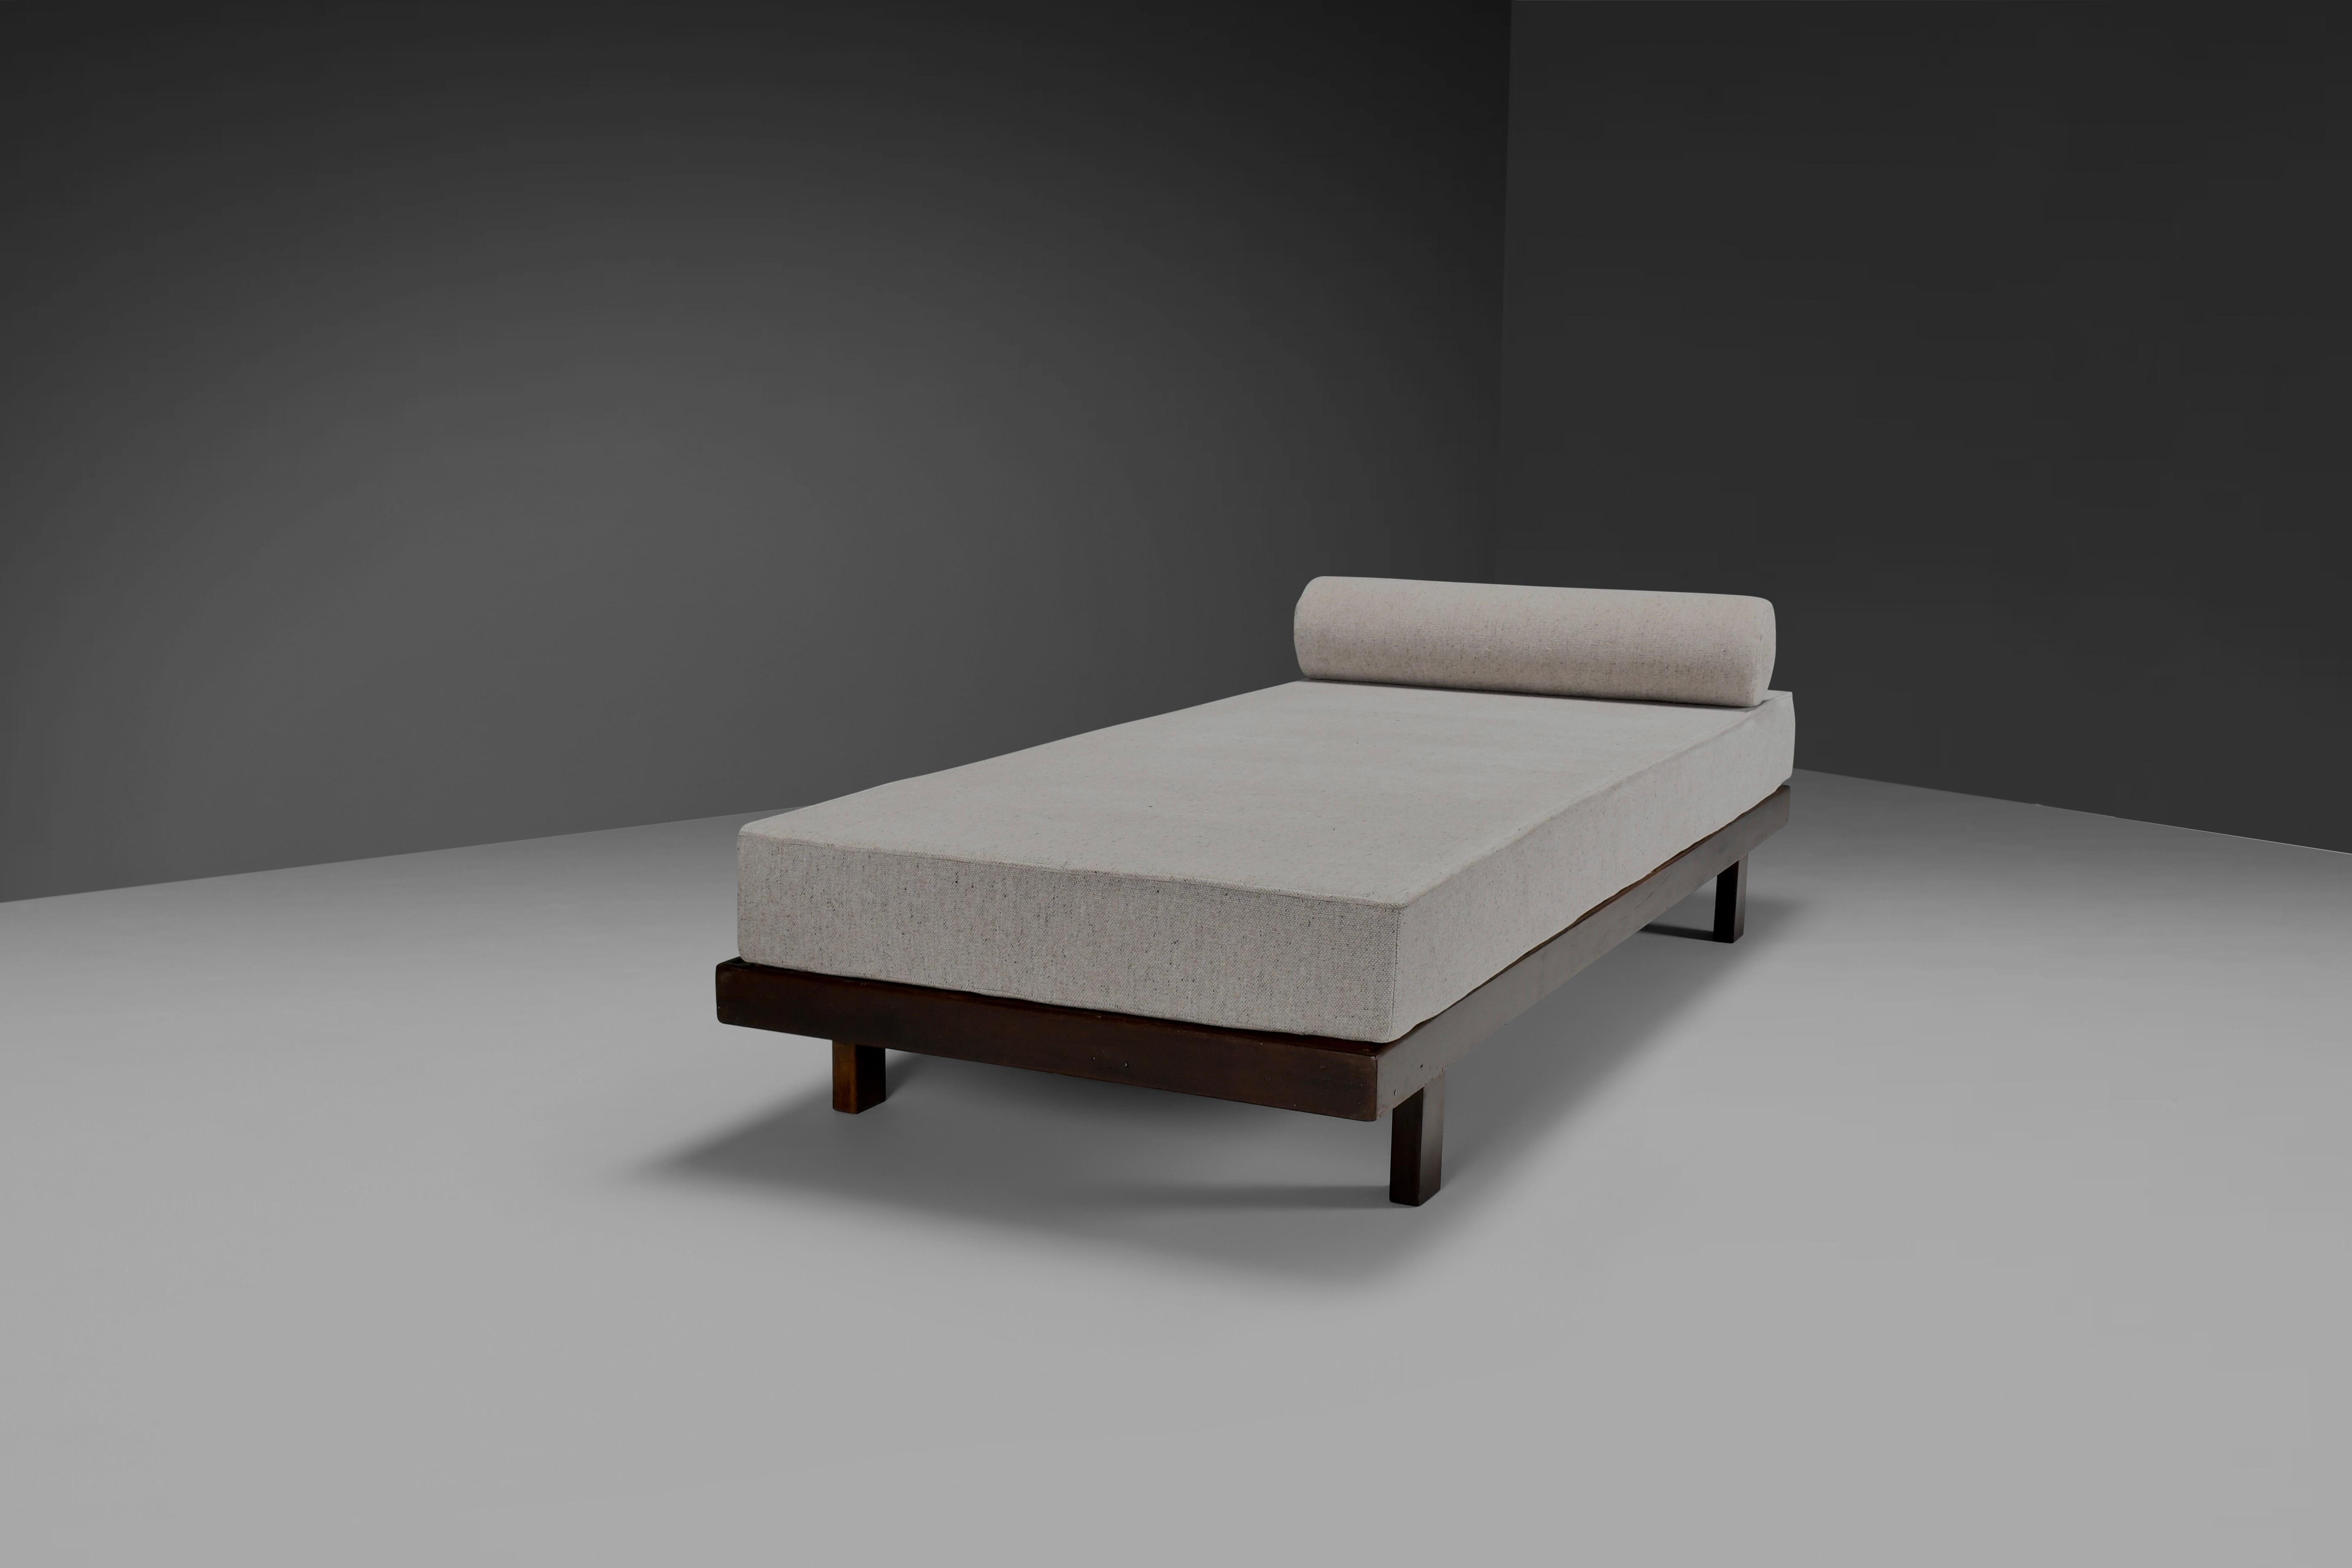 Mid-Century Modern Minimalist Daybed by Jorge Zalszupin for L’atelier, Brazil, 1959 '2 Available' For Sale